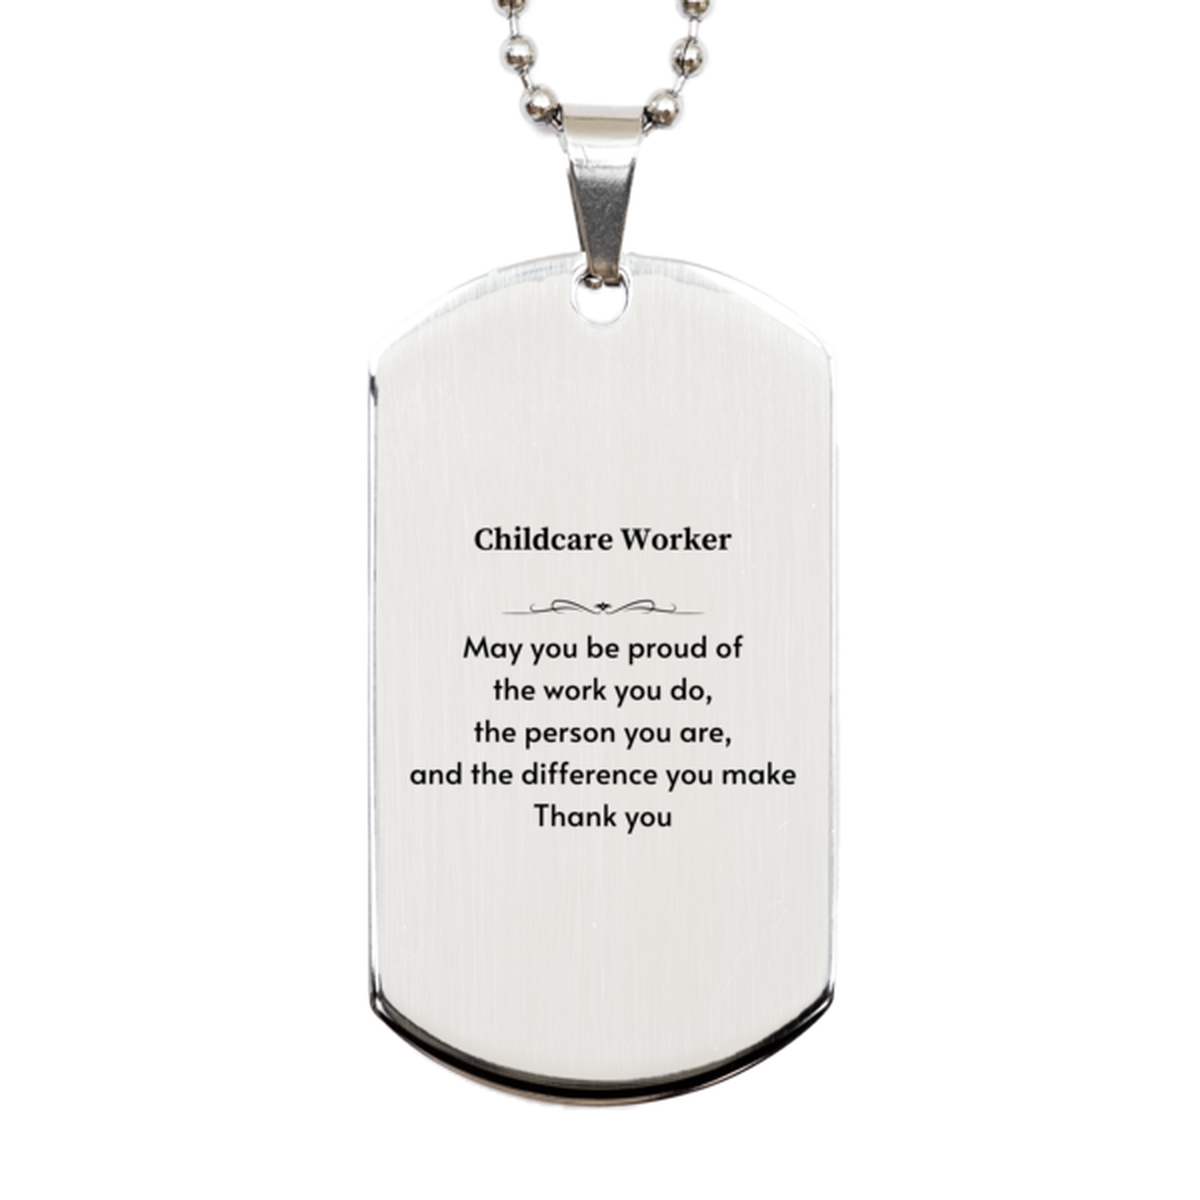 Heartwarming Silver Dog Tag Retirement Coworkers Gifts for Childcare Worker, Childcare Worker May You be proud of the work you do, the person you are Gifts for Boss Men Women Friends